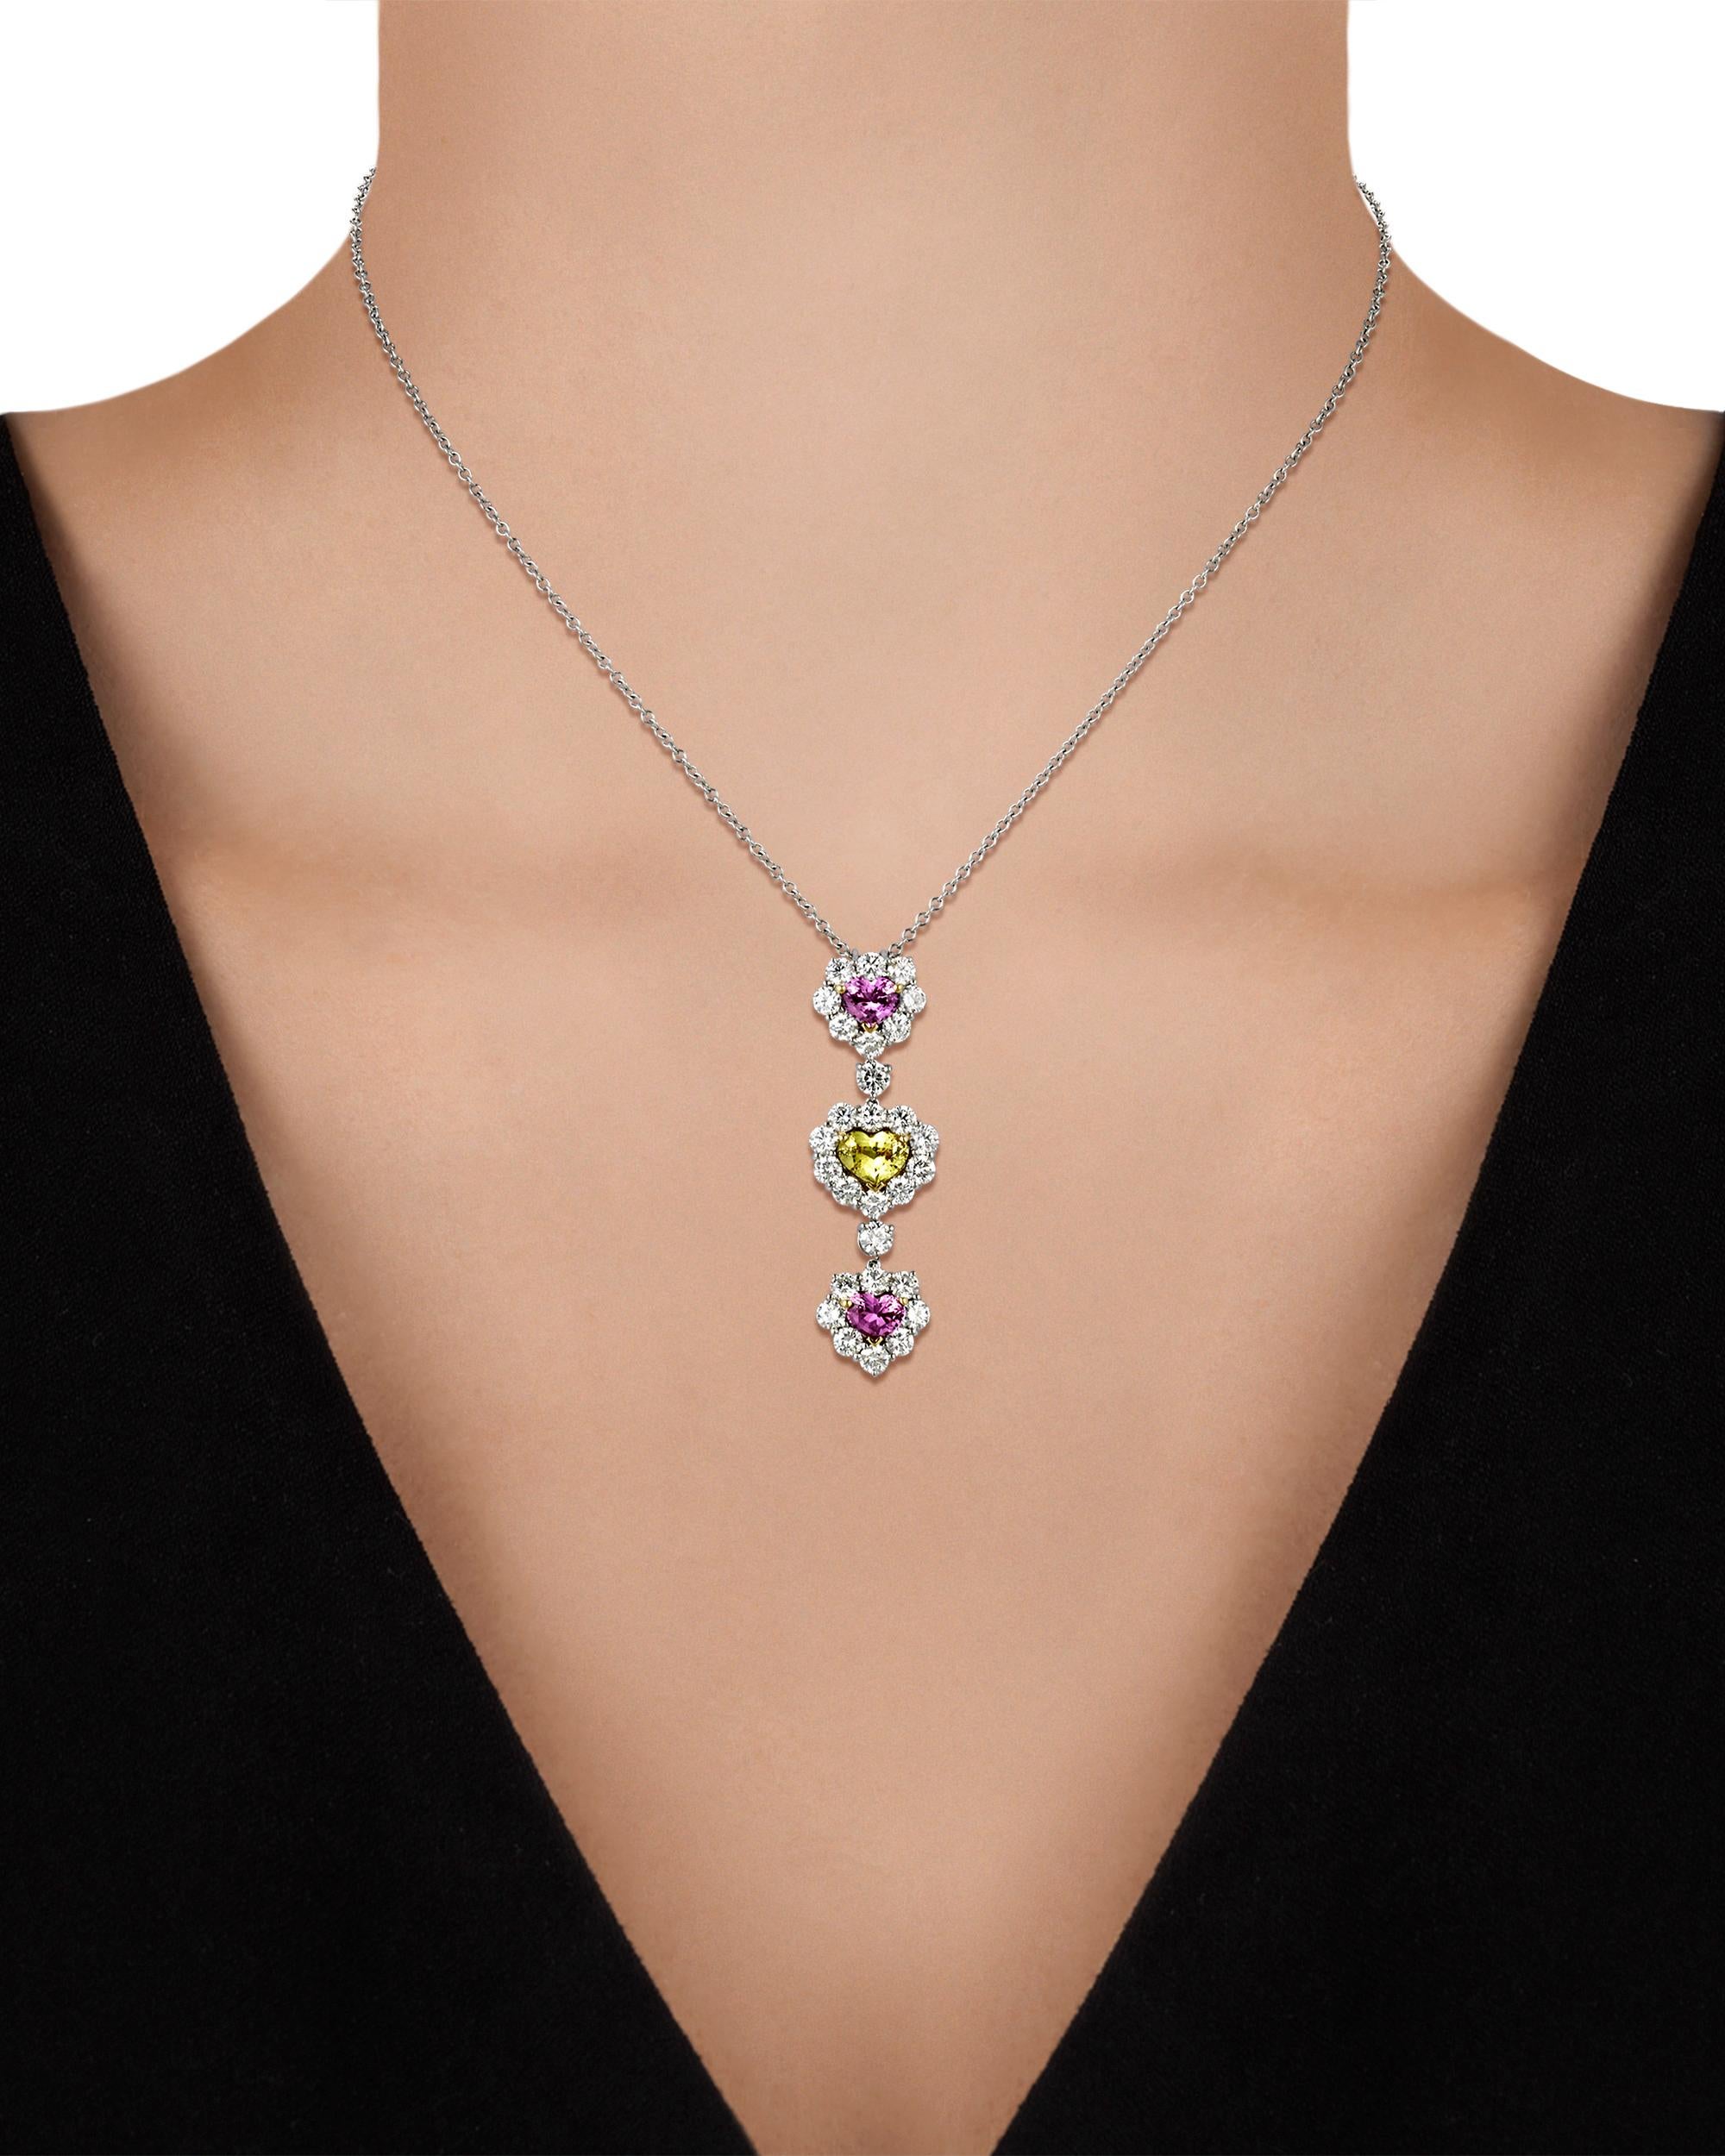 Modern Heart-Shaped Colored Sapphire Necklace, 3.20 Carats